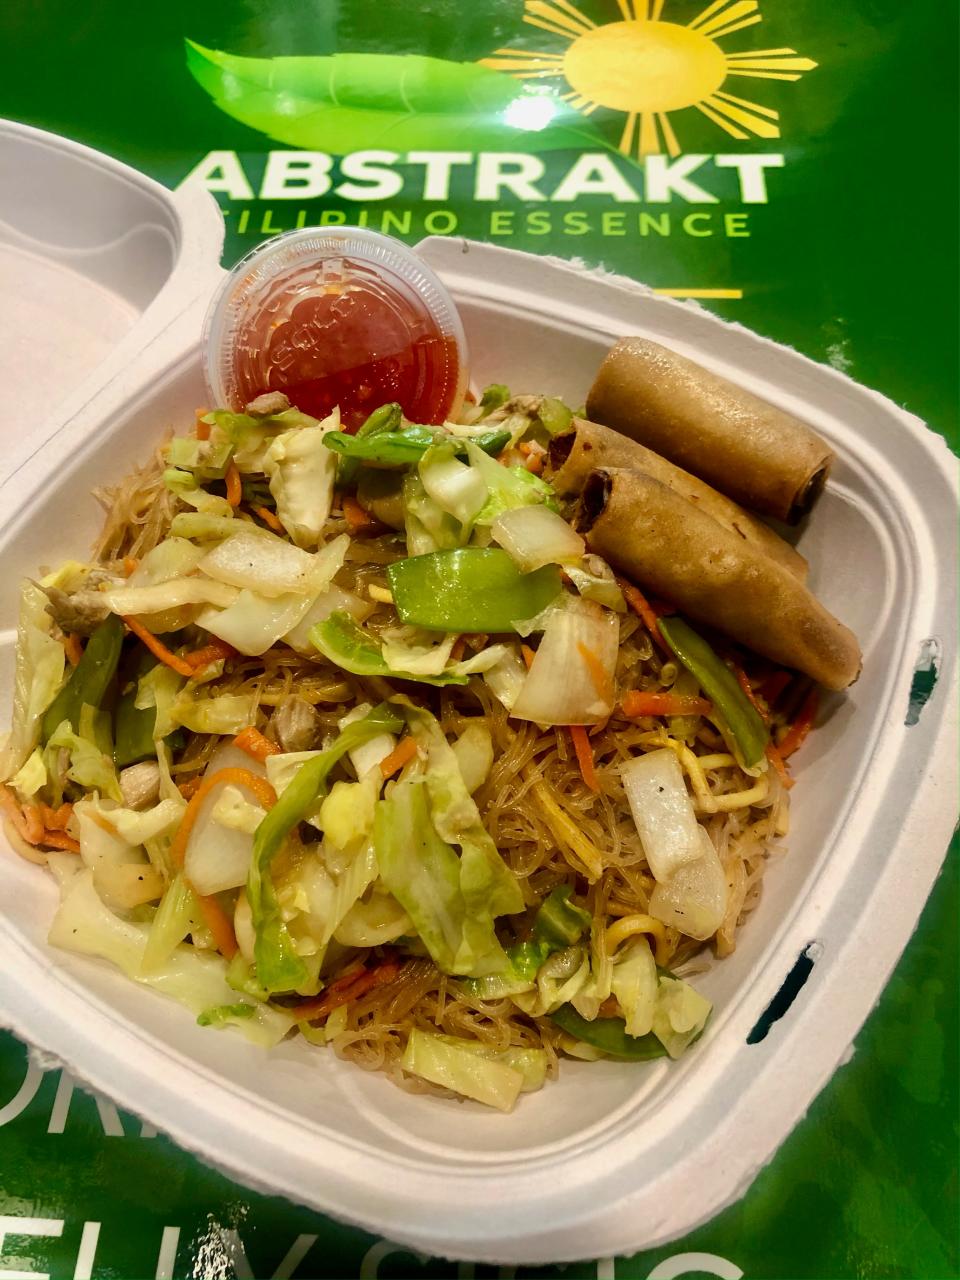 Many of the dishes served from the Abstrakt Filipino Essence food truck, such as the popular Filipino pancit and lumpia, will show up on the menu when Abstrakt opens a Jacksonville Beach restaurant this summer.